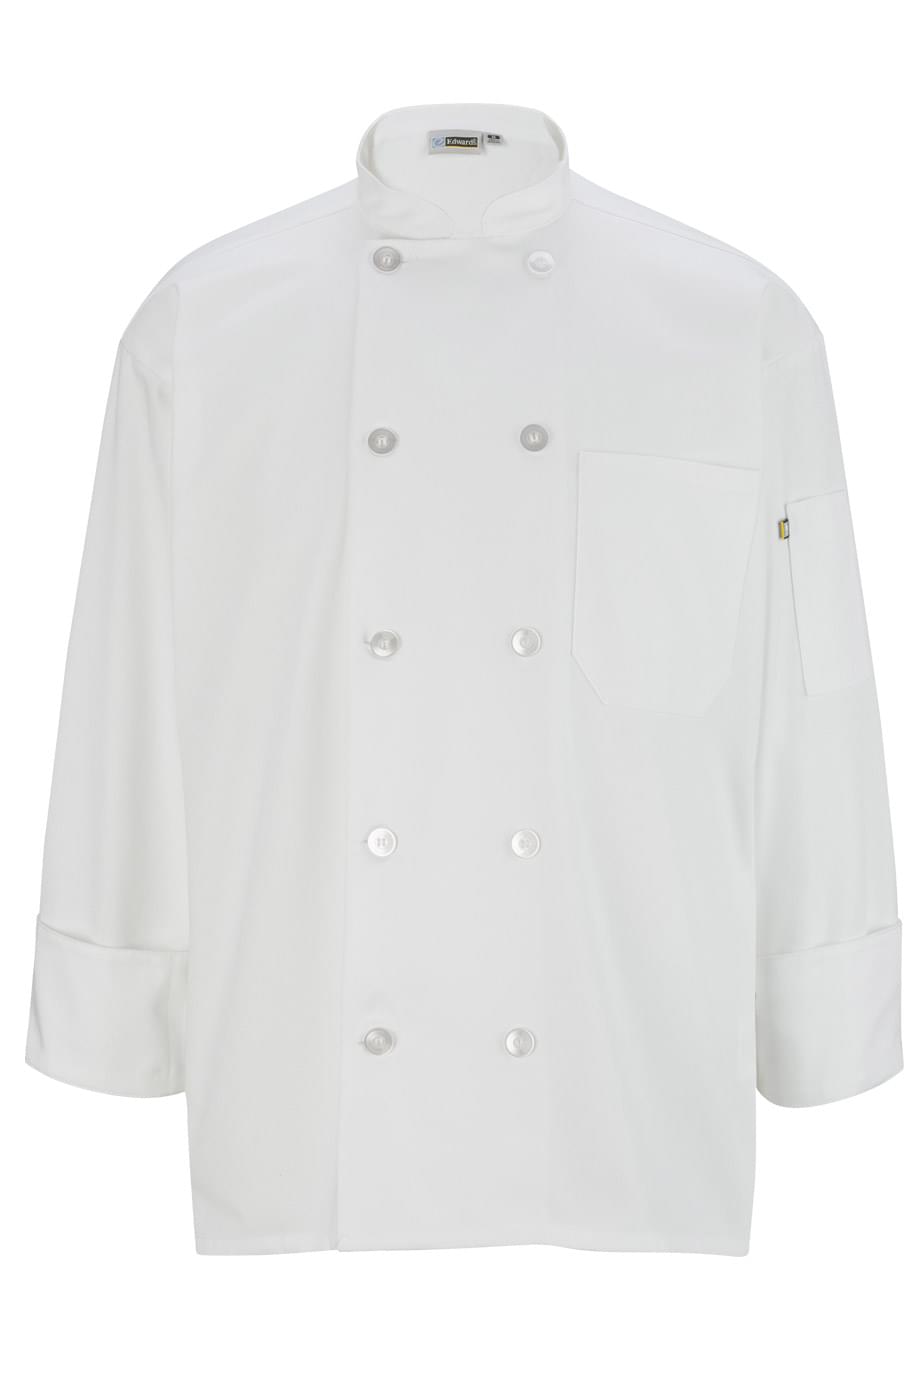 Dickies Chef Giovanni Classic ChefCoat 10 Button Unisex Jacket 100% Cotton DC119 